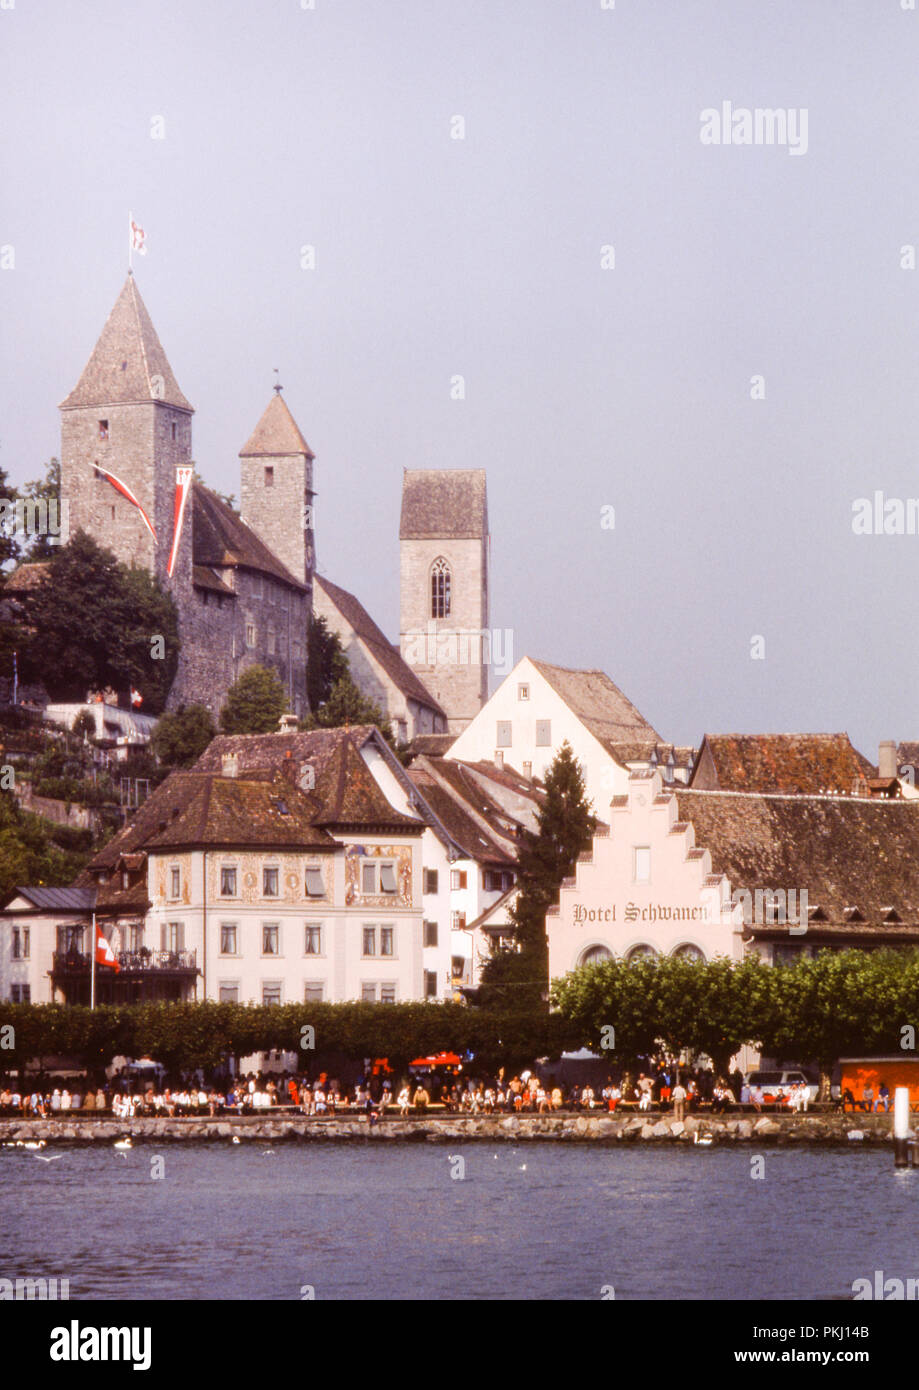 Rapperswil Harbour, Switzerland with buildings of the Einsiedlerhaus and Capuchin Monastery. Original archive photo taken in September 1975. Stock Photo